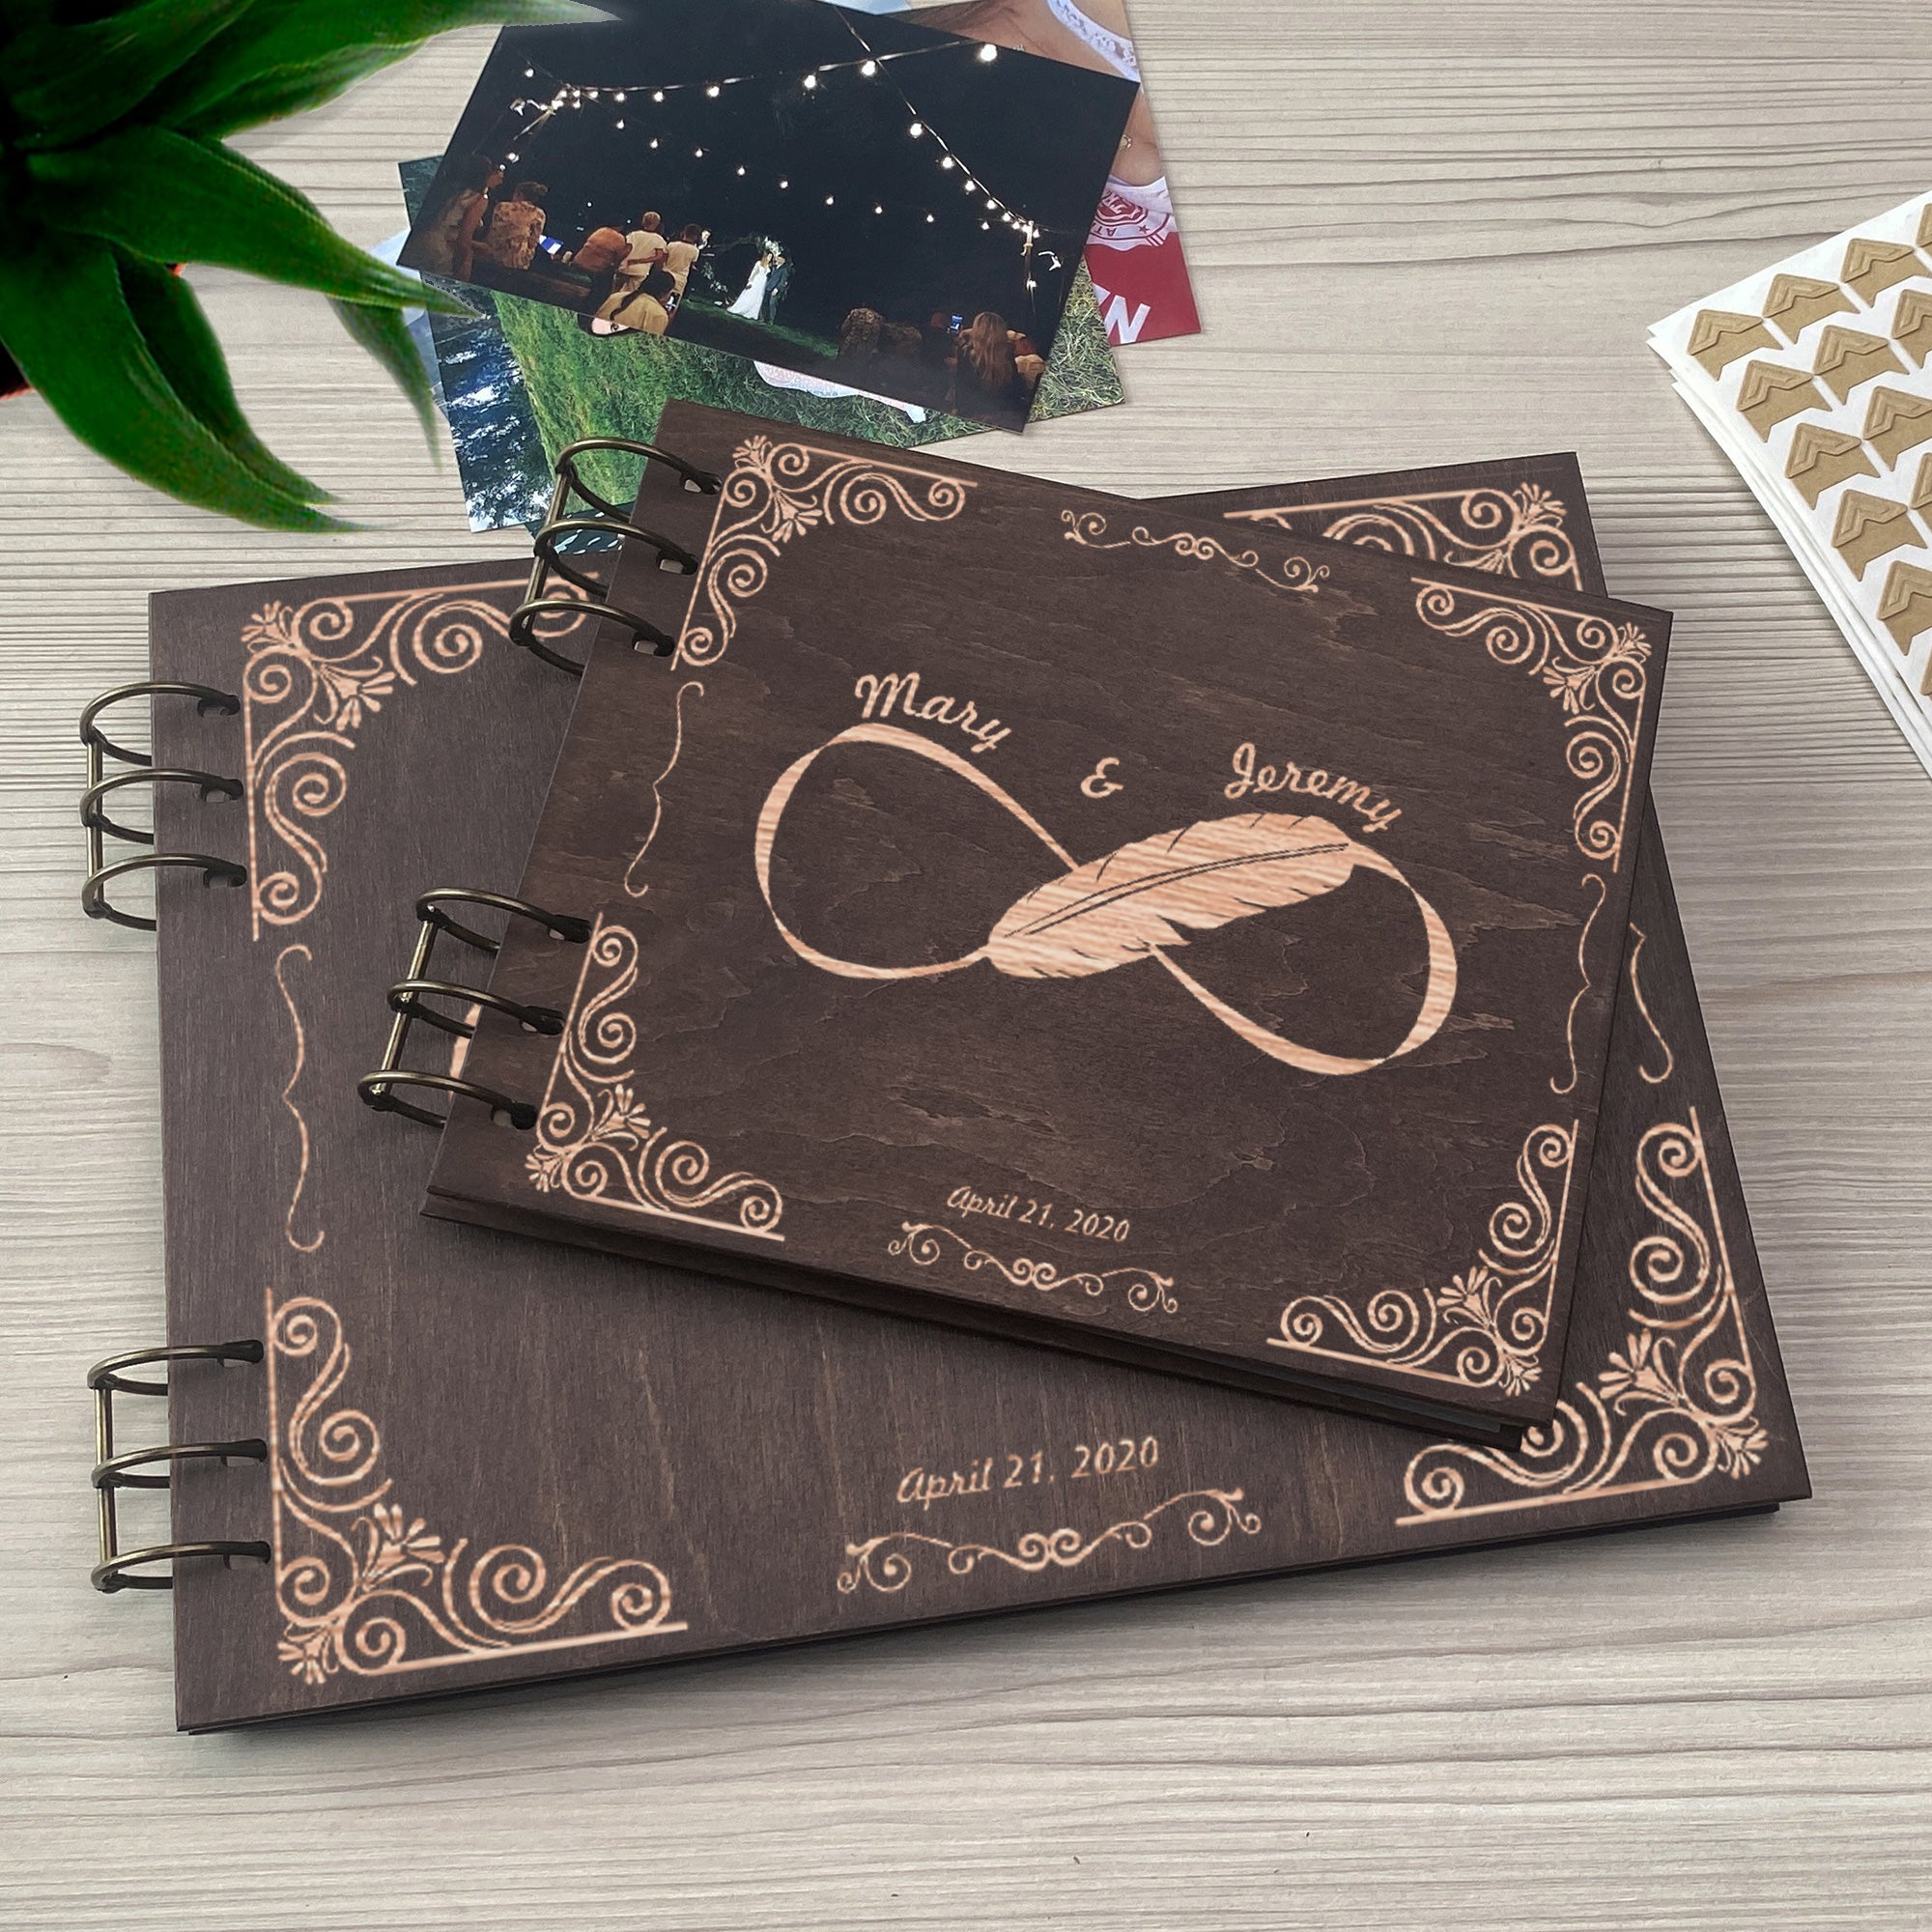 Personalized photo album cover and Infinity engraving